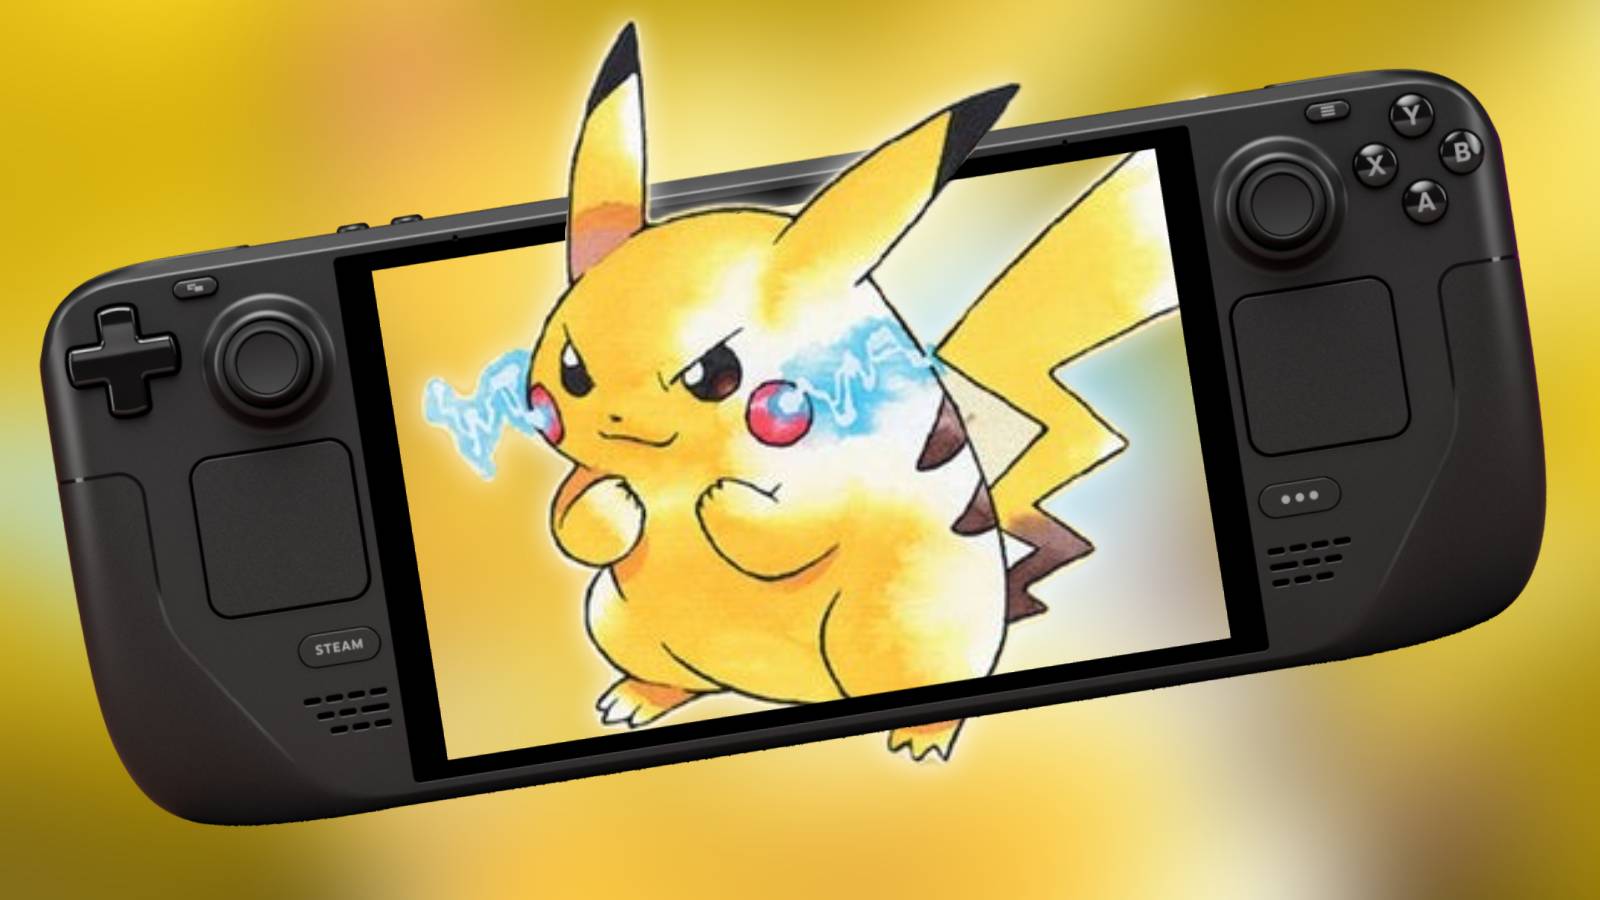 Pikachu from the official Pokemon Yellow boxart on the screen of a Steam Deck.